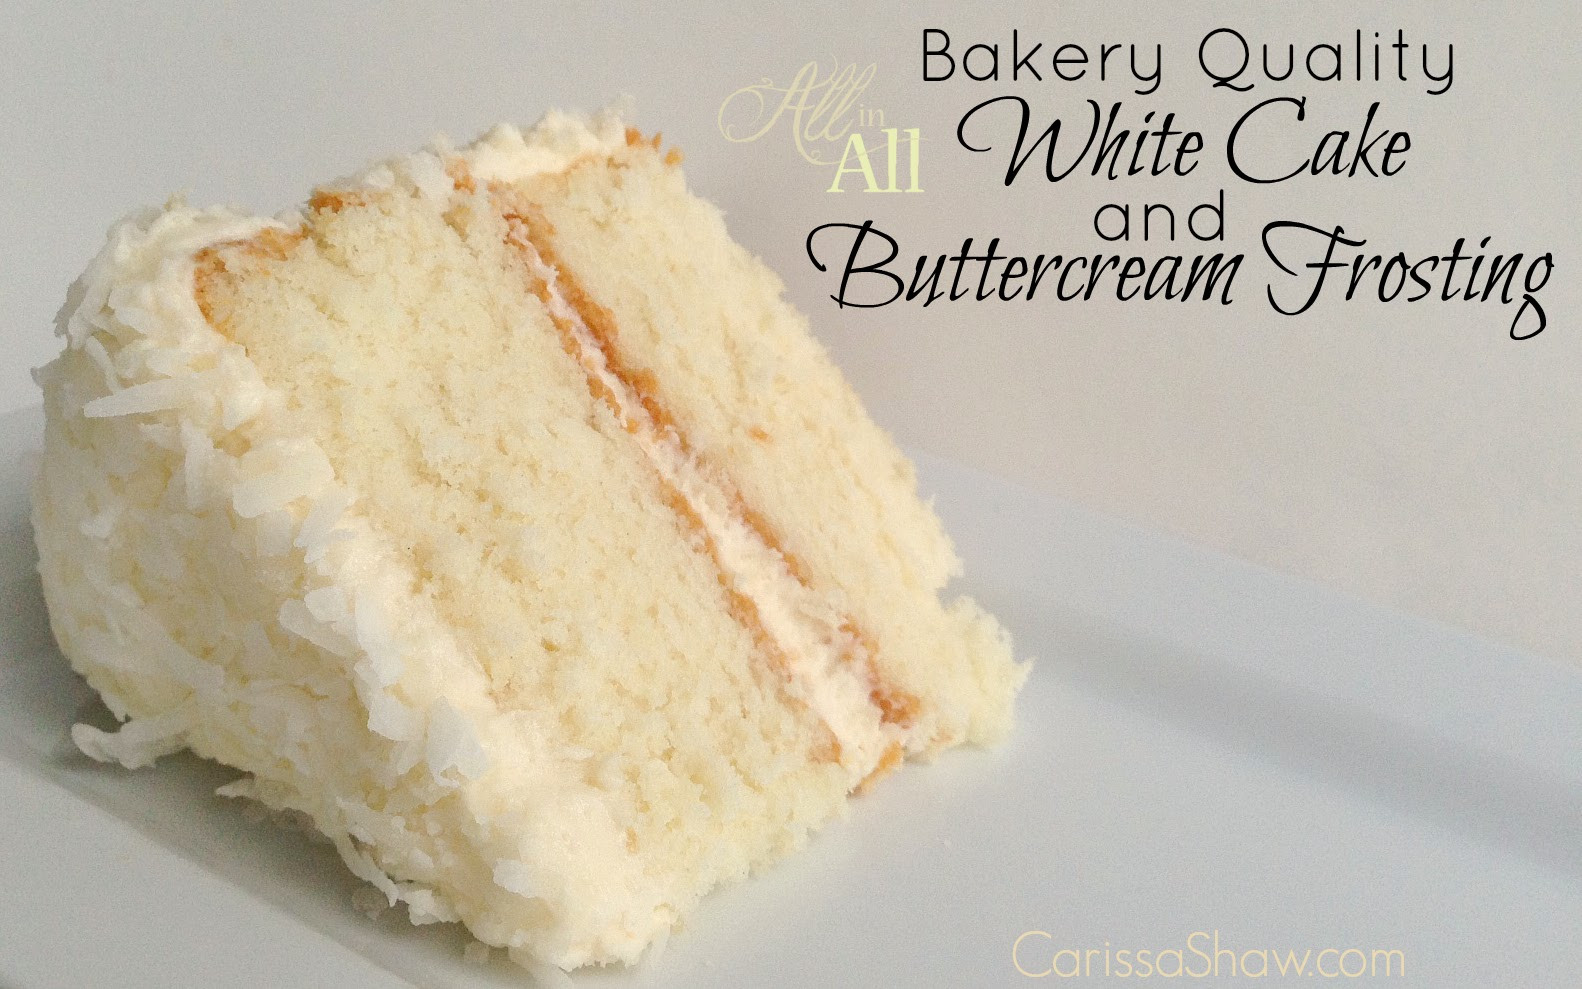 Bakery Cake Recipes
 Making a Bakery Quality White Cake with Buttercream